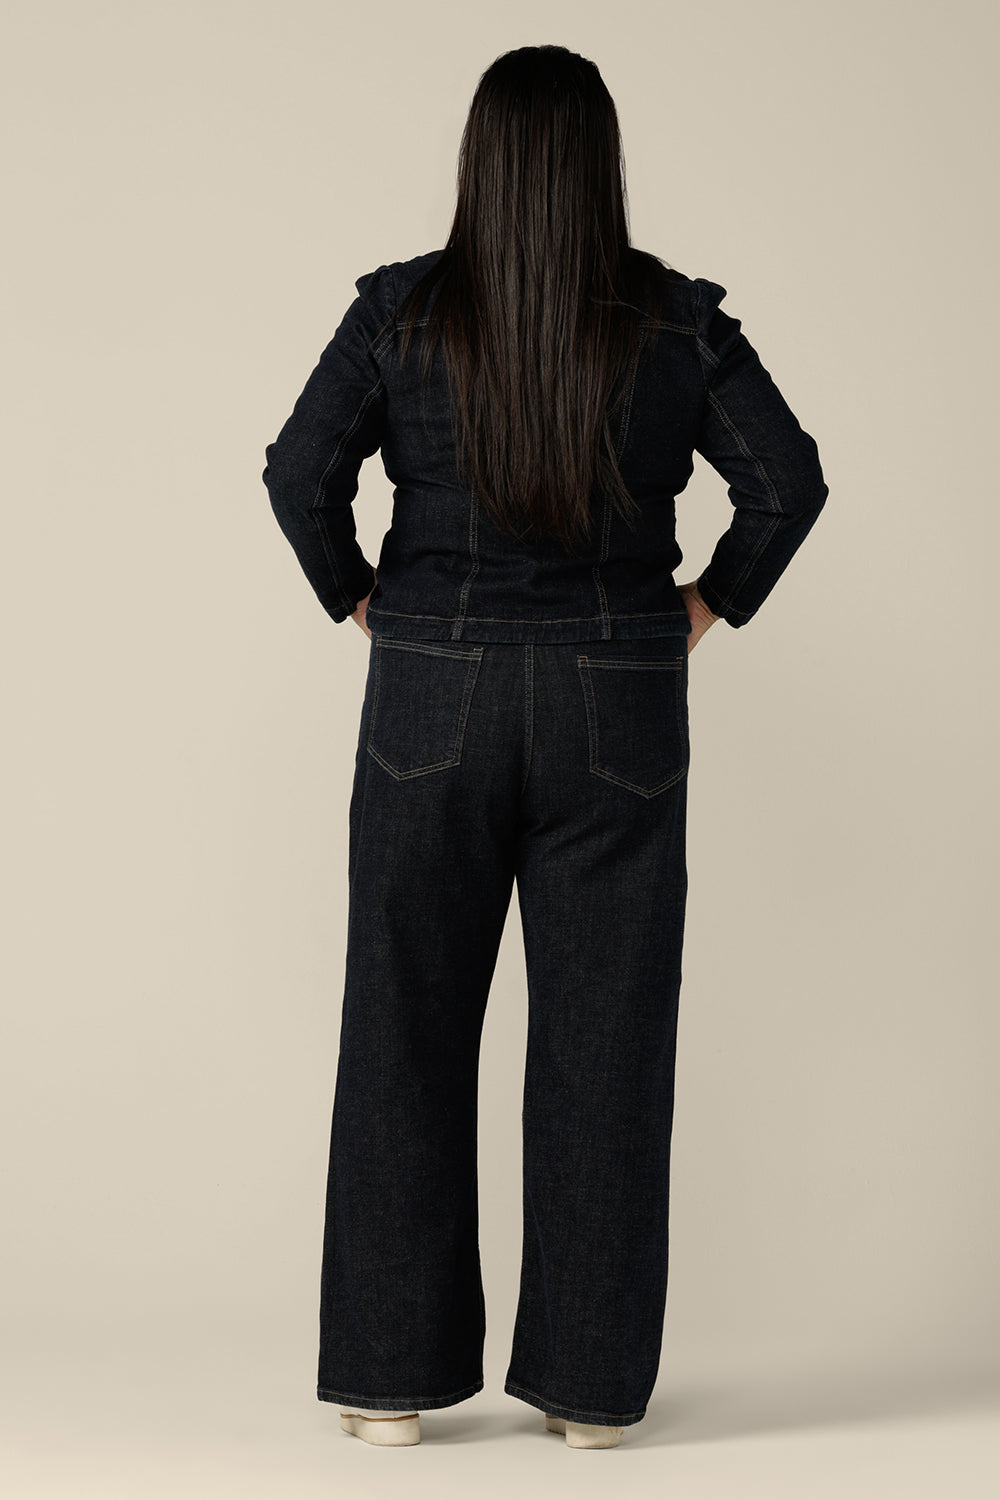 Back view of ethical and sustainable jeans wear made for women in sizes 8 to 24, these jeans are high-waisted, with flared legs. Worn here with a denim jacket, in a size 16, these conscious jeans by Australian and New Zealand women's clothing brand, L&F are tailored to fit women's curves.